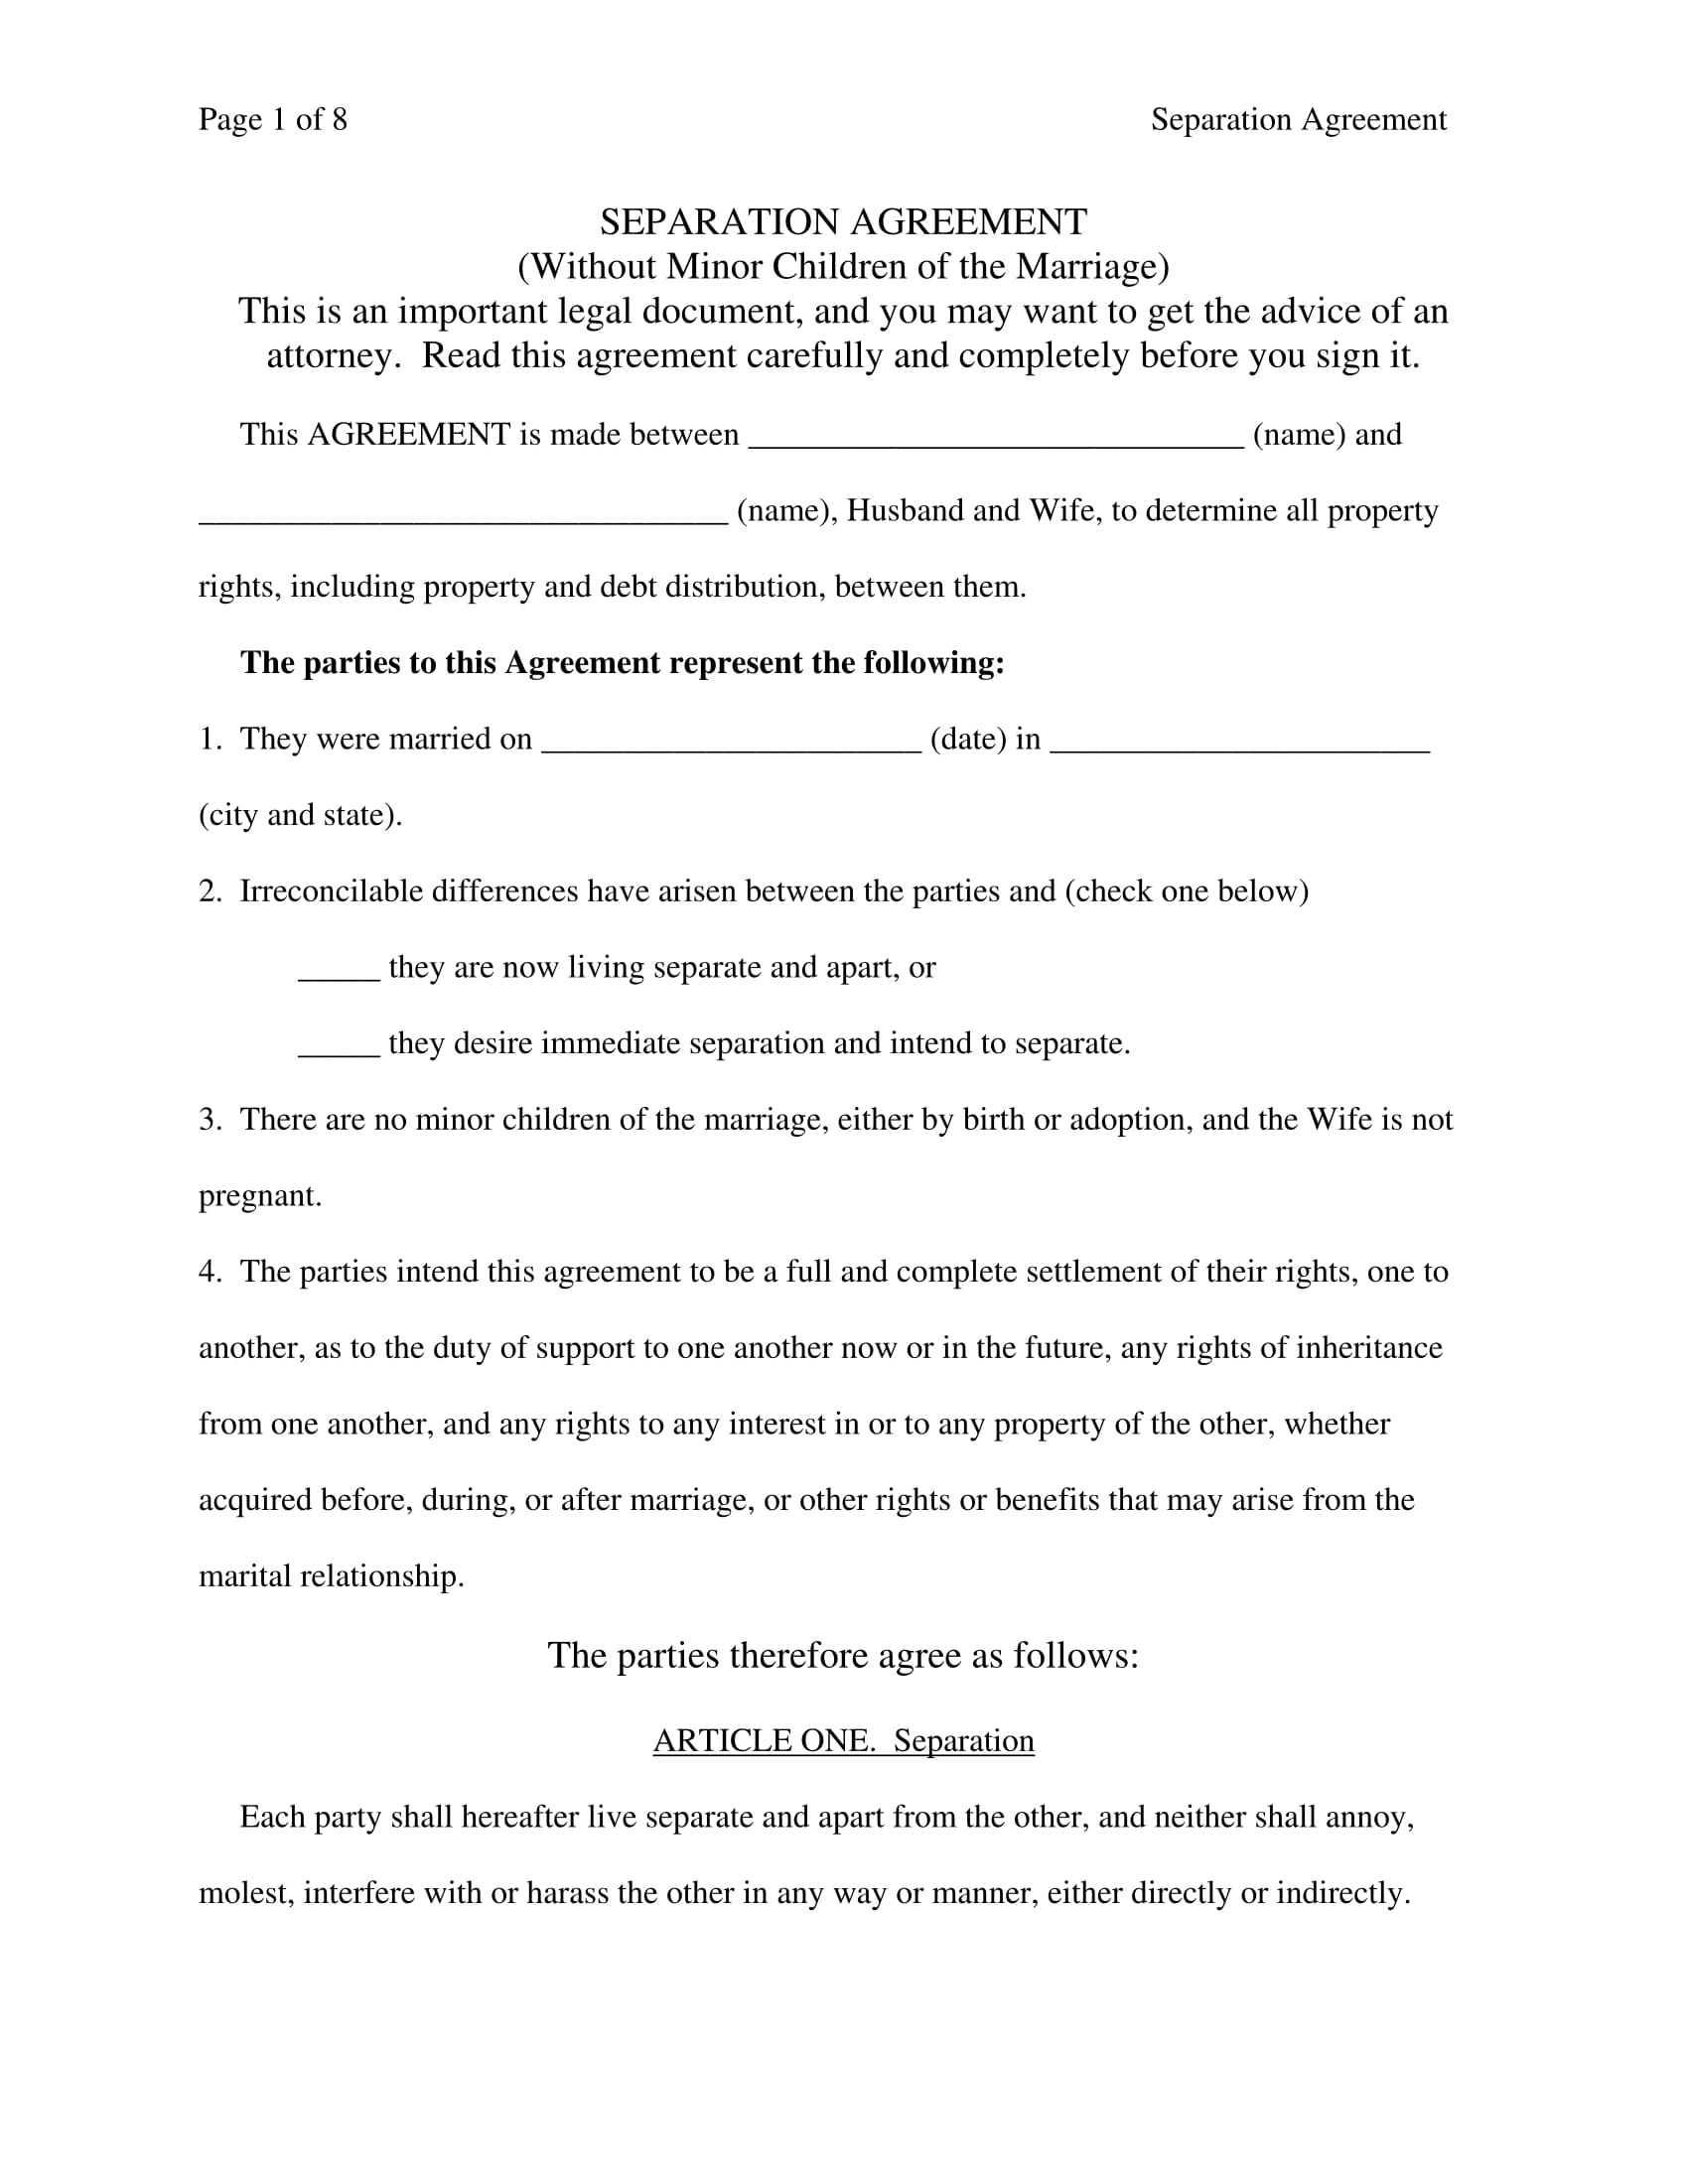 free separation agreement form 1